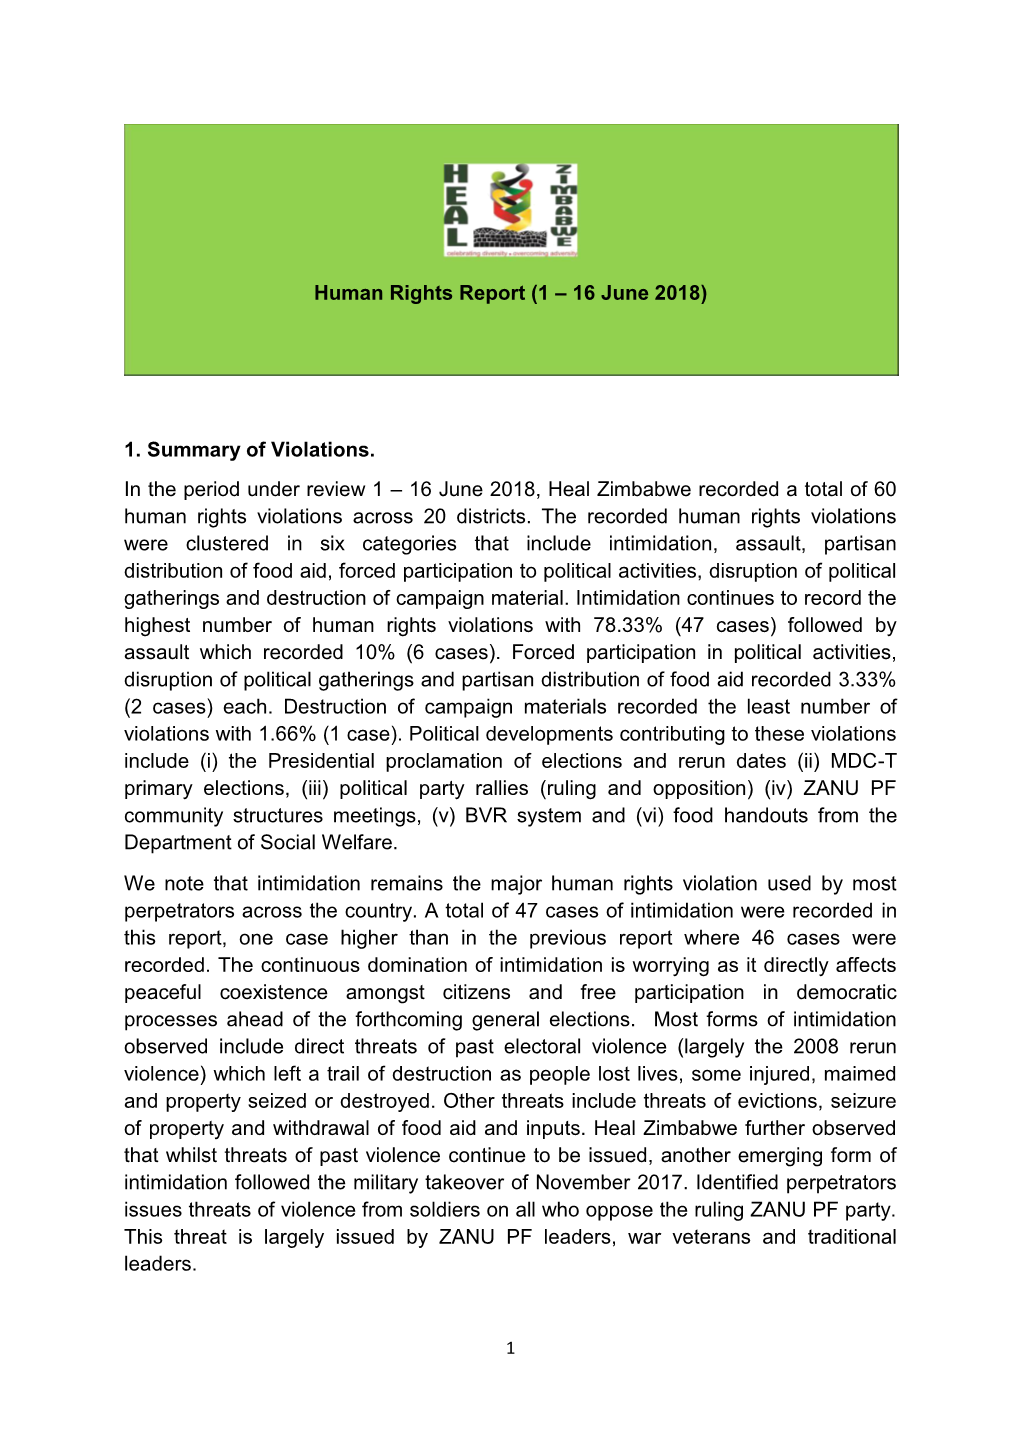 Human Rights Report (1 – 16 June 2018) 1. Summary of Violations. in the Period Under Review 1 – 16 June 2018, Heal Zimbabwe